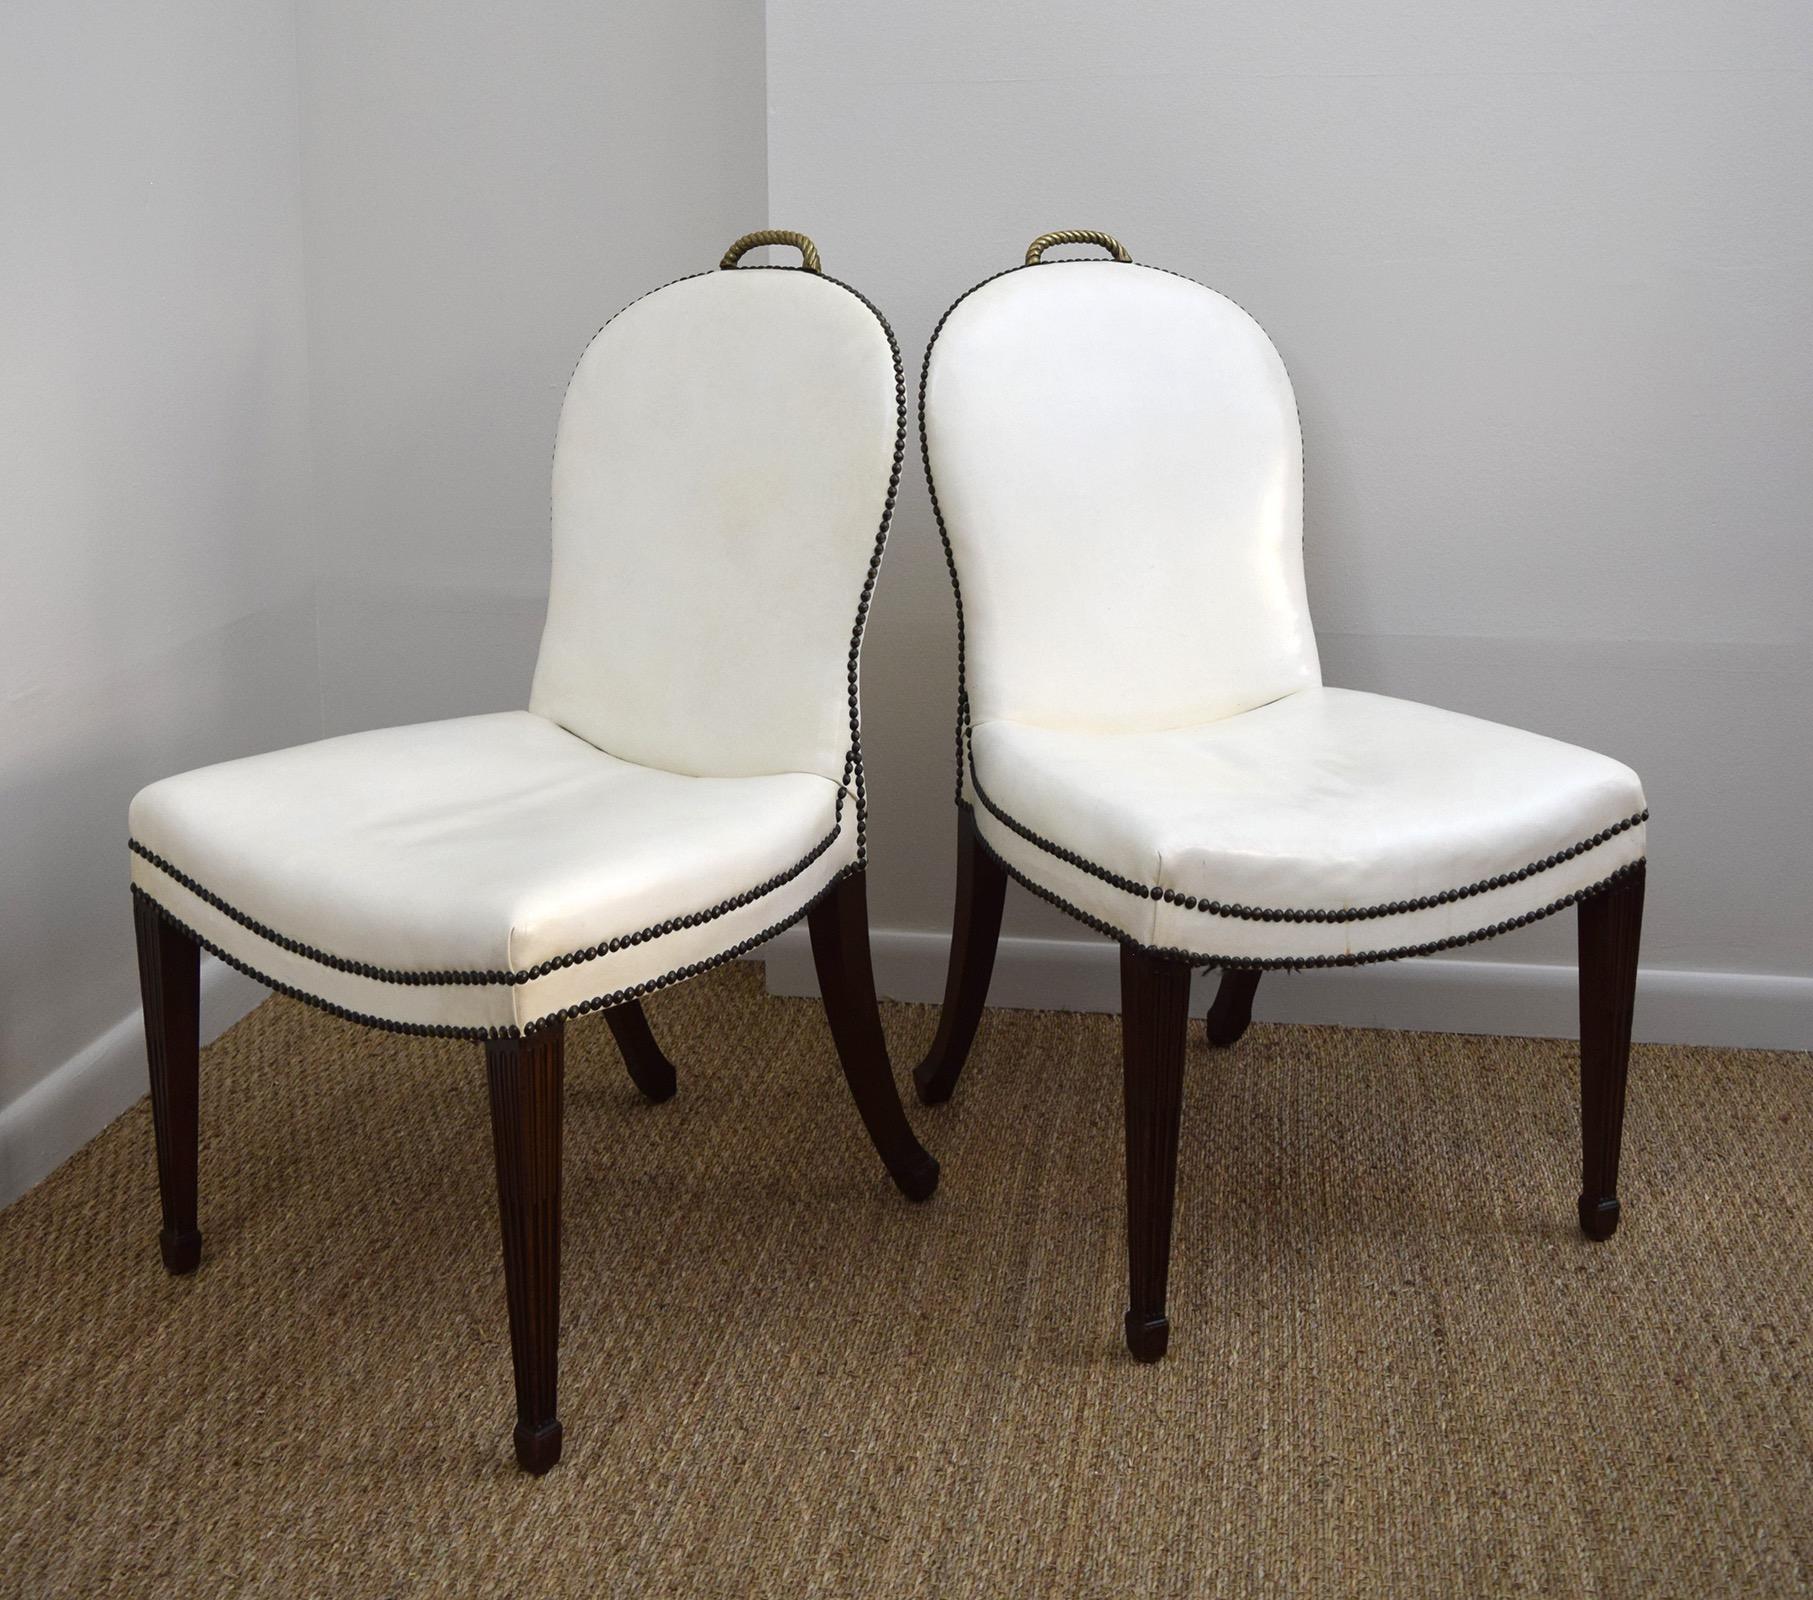 These over-scaled chairs were said to have been designed by Chicago architect Sam Marx, but they were probably made by William Quigley, whose workshop and showroom supplied him with furniture. The sweeping lines of the back and seat, the white